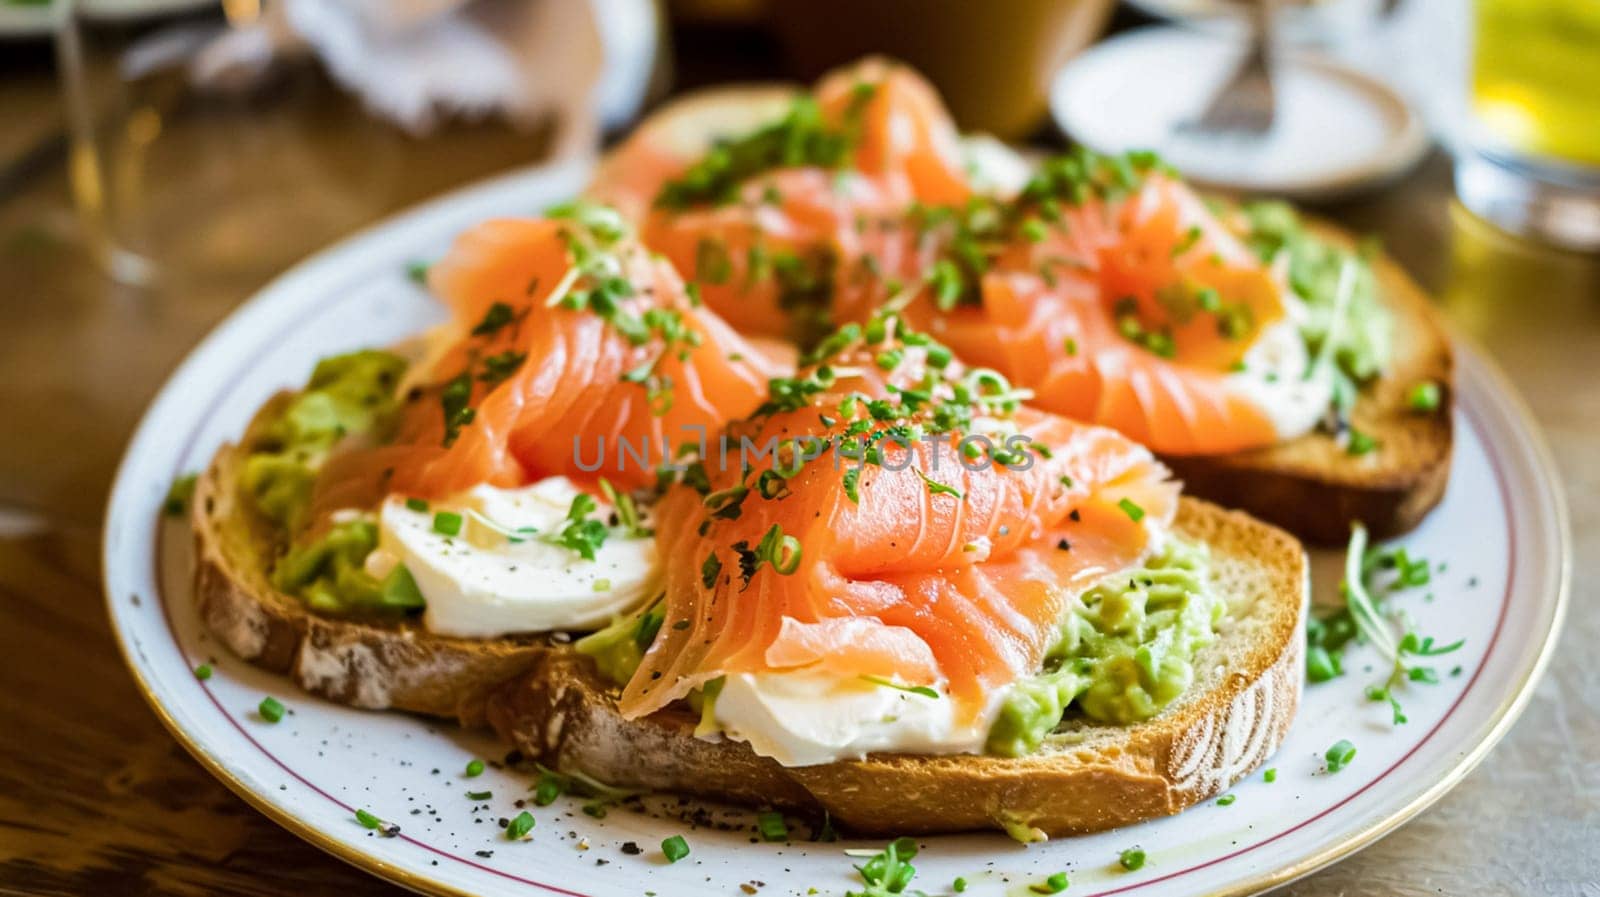 Avocado toast with smoked salmon for breakfast, homemade cuisine and traditional food, country life by Anneleven